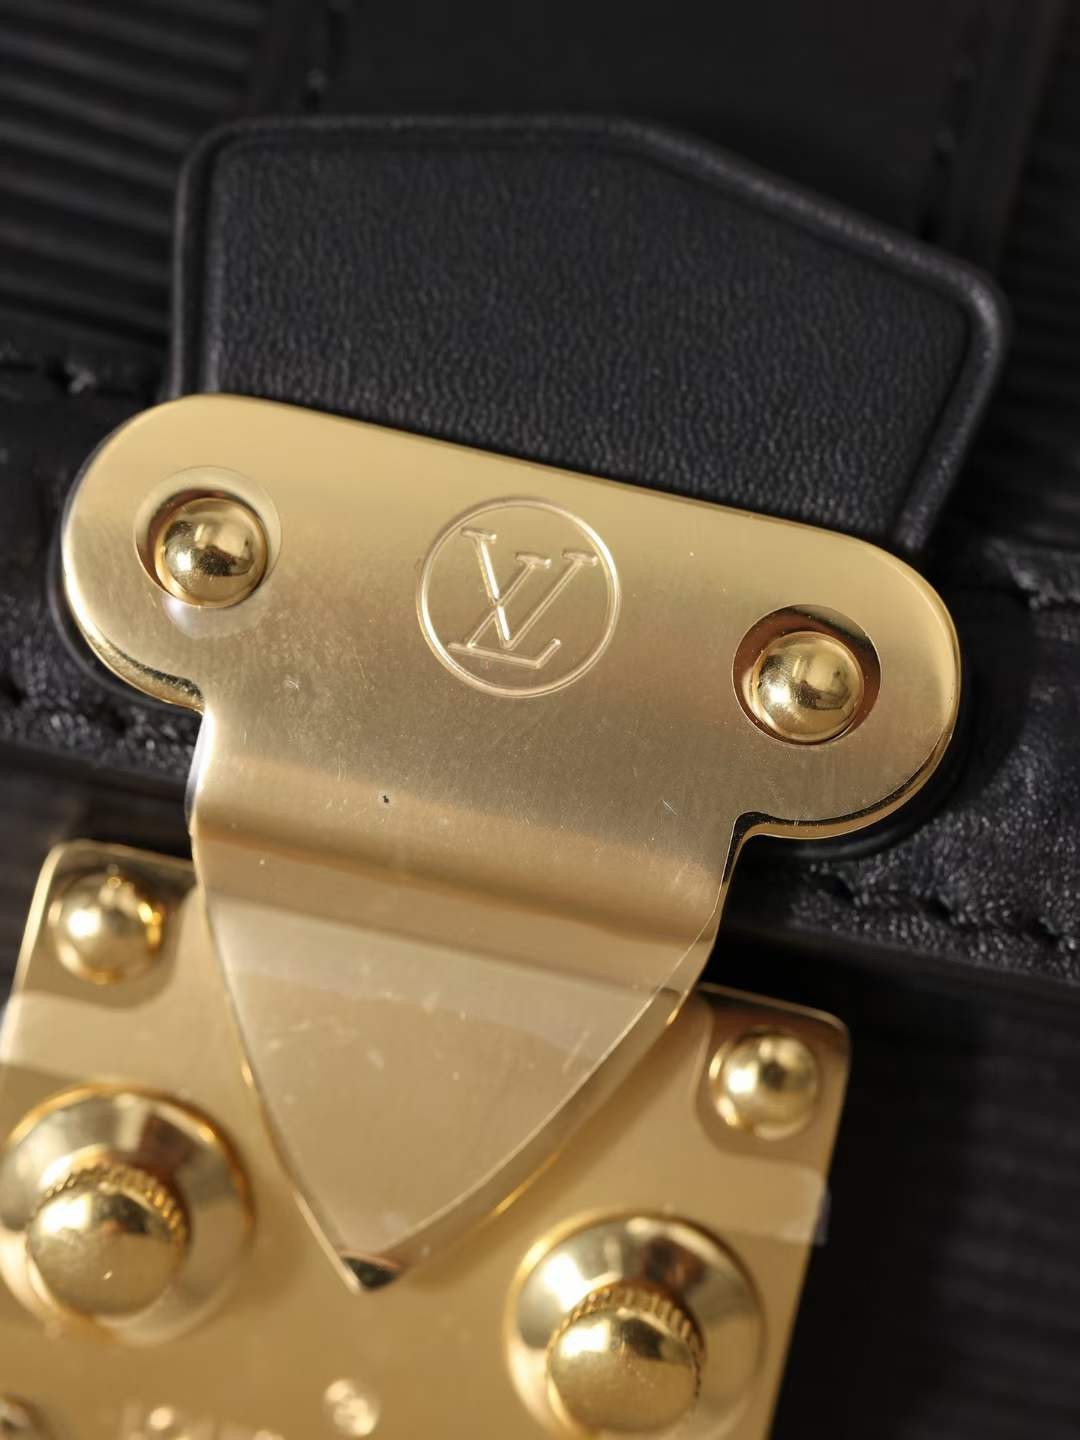 Louis Vuitton M58655 Papillon Trunk top replica bags, exclusive channel goods overall details (2022 Special)-Best Quality Fake designer Bag Review, Replica designer bag ru